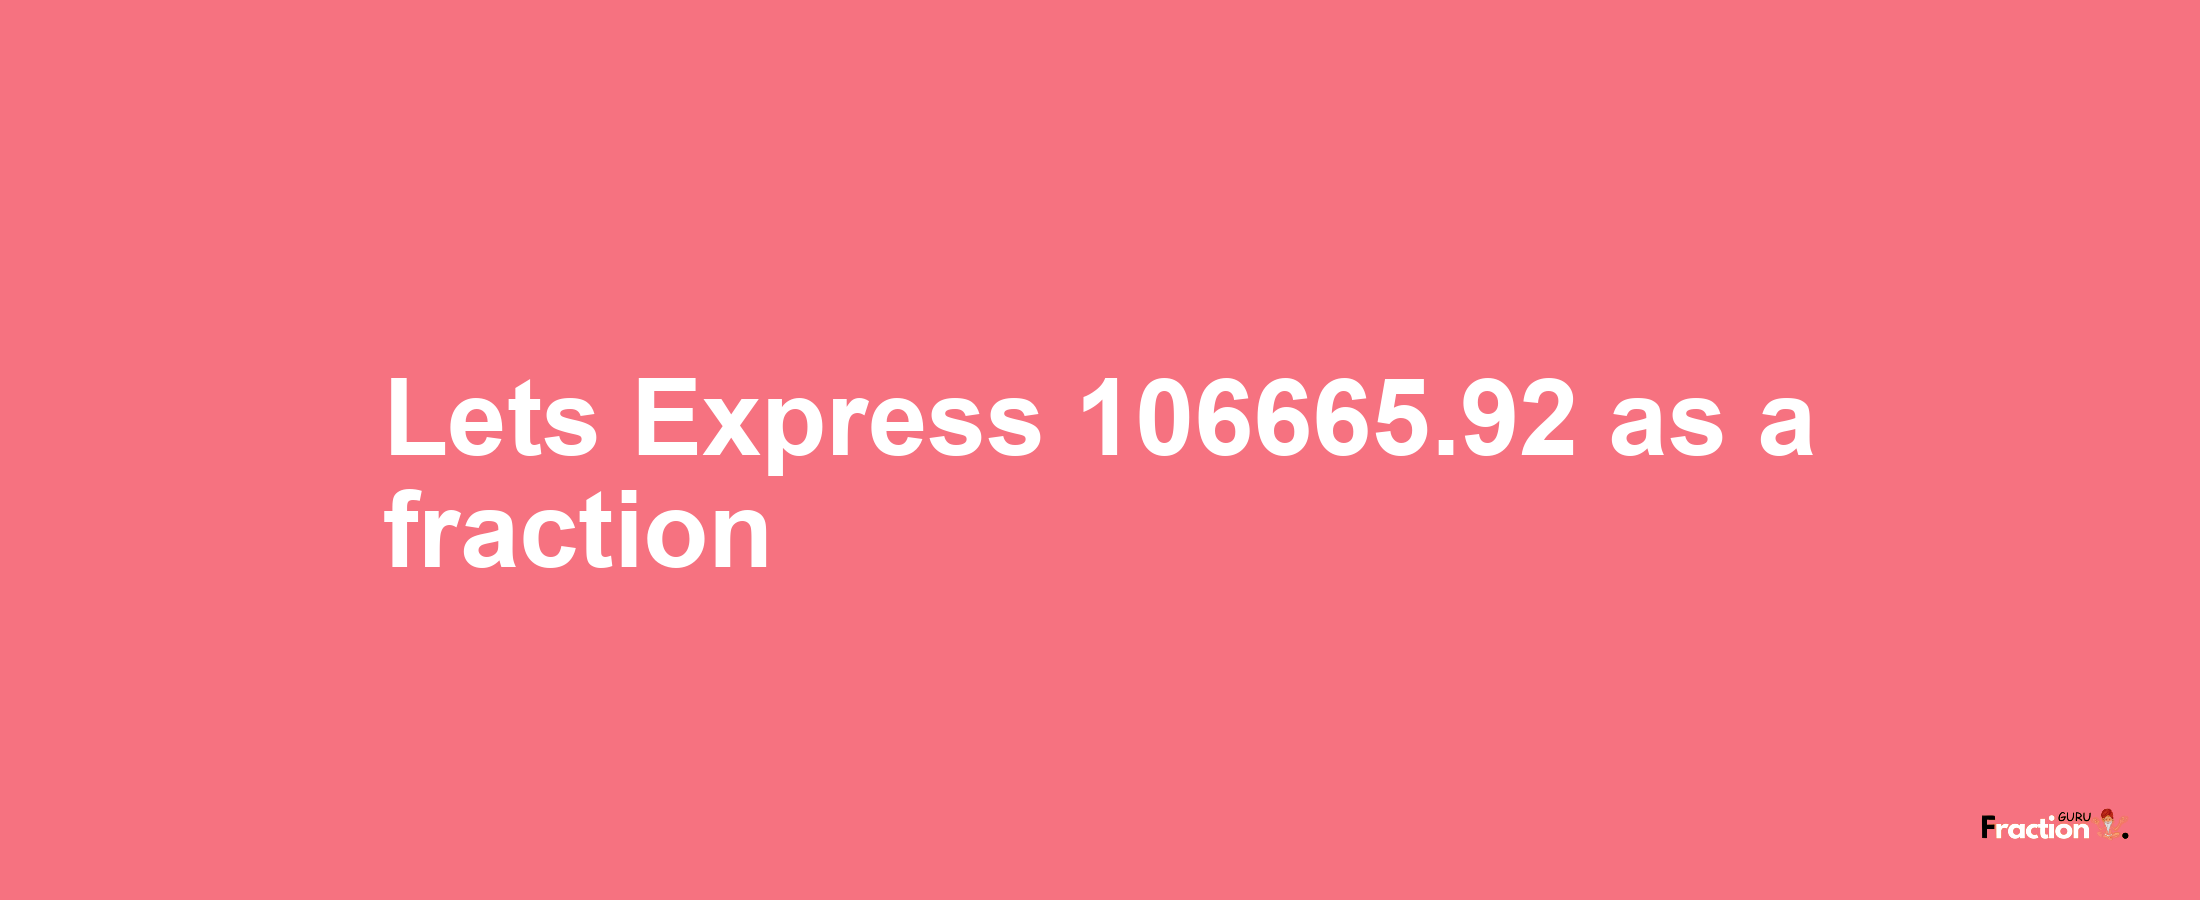 Lets Express 106665.92 as afraction